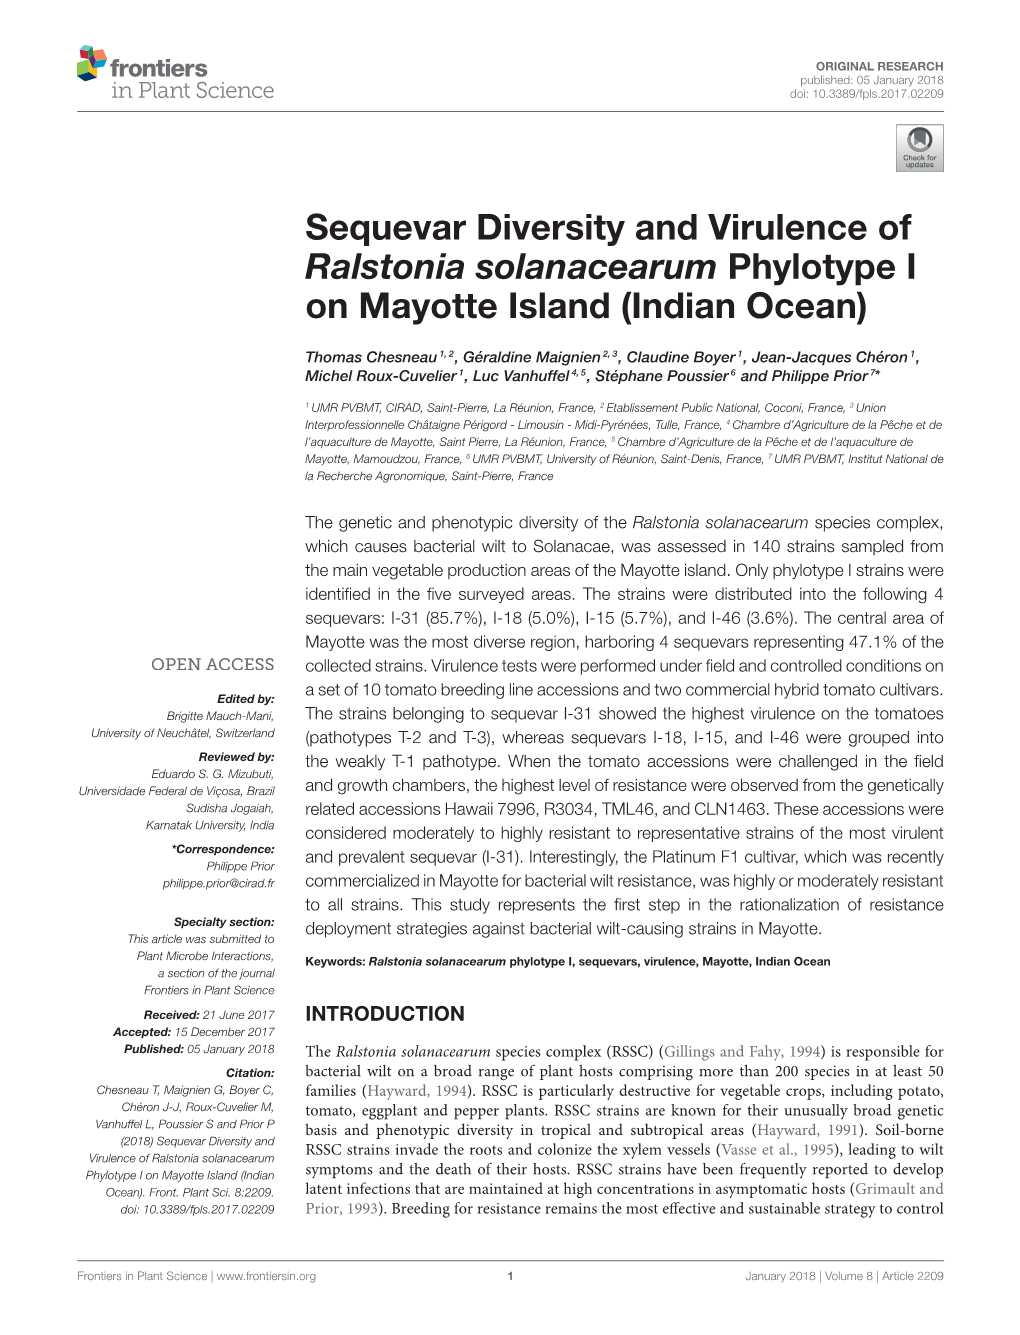 Sequevar Diversity and Virulence of Ralstonia Solanacearum Phylotype I on Mayotte Island (Indian Ocean)